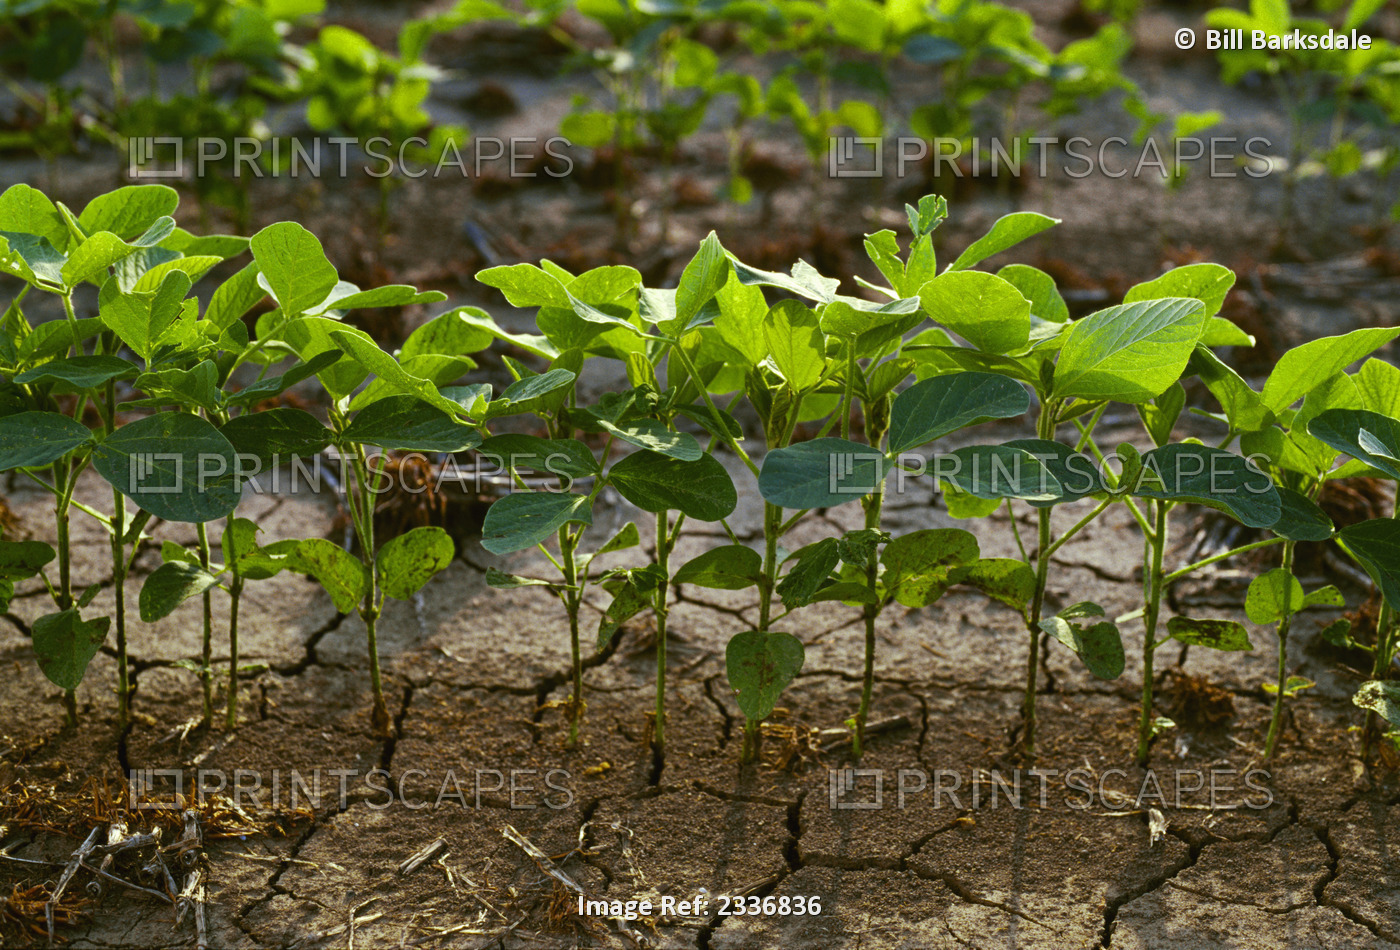 Agriculture - A row of early growth soybean plants / Mississippi, USA.